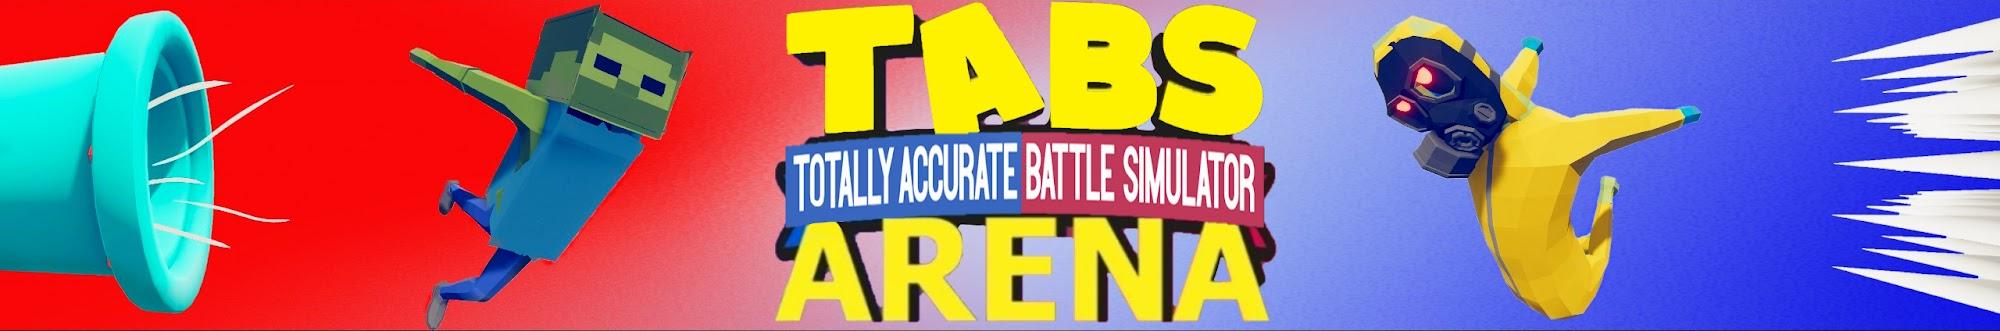 TABS ARENA